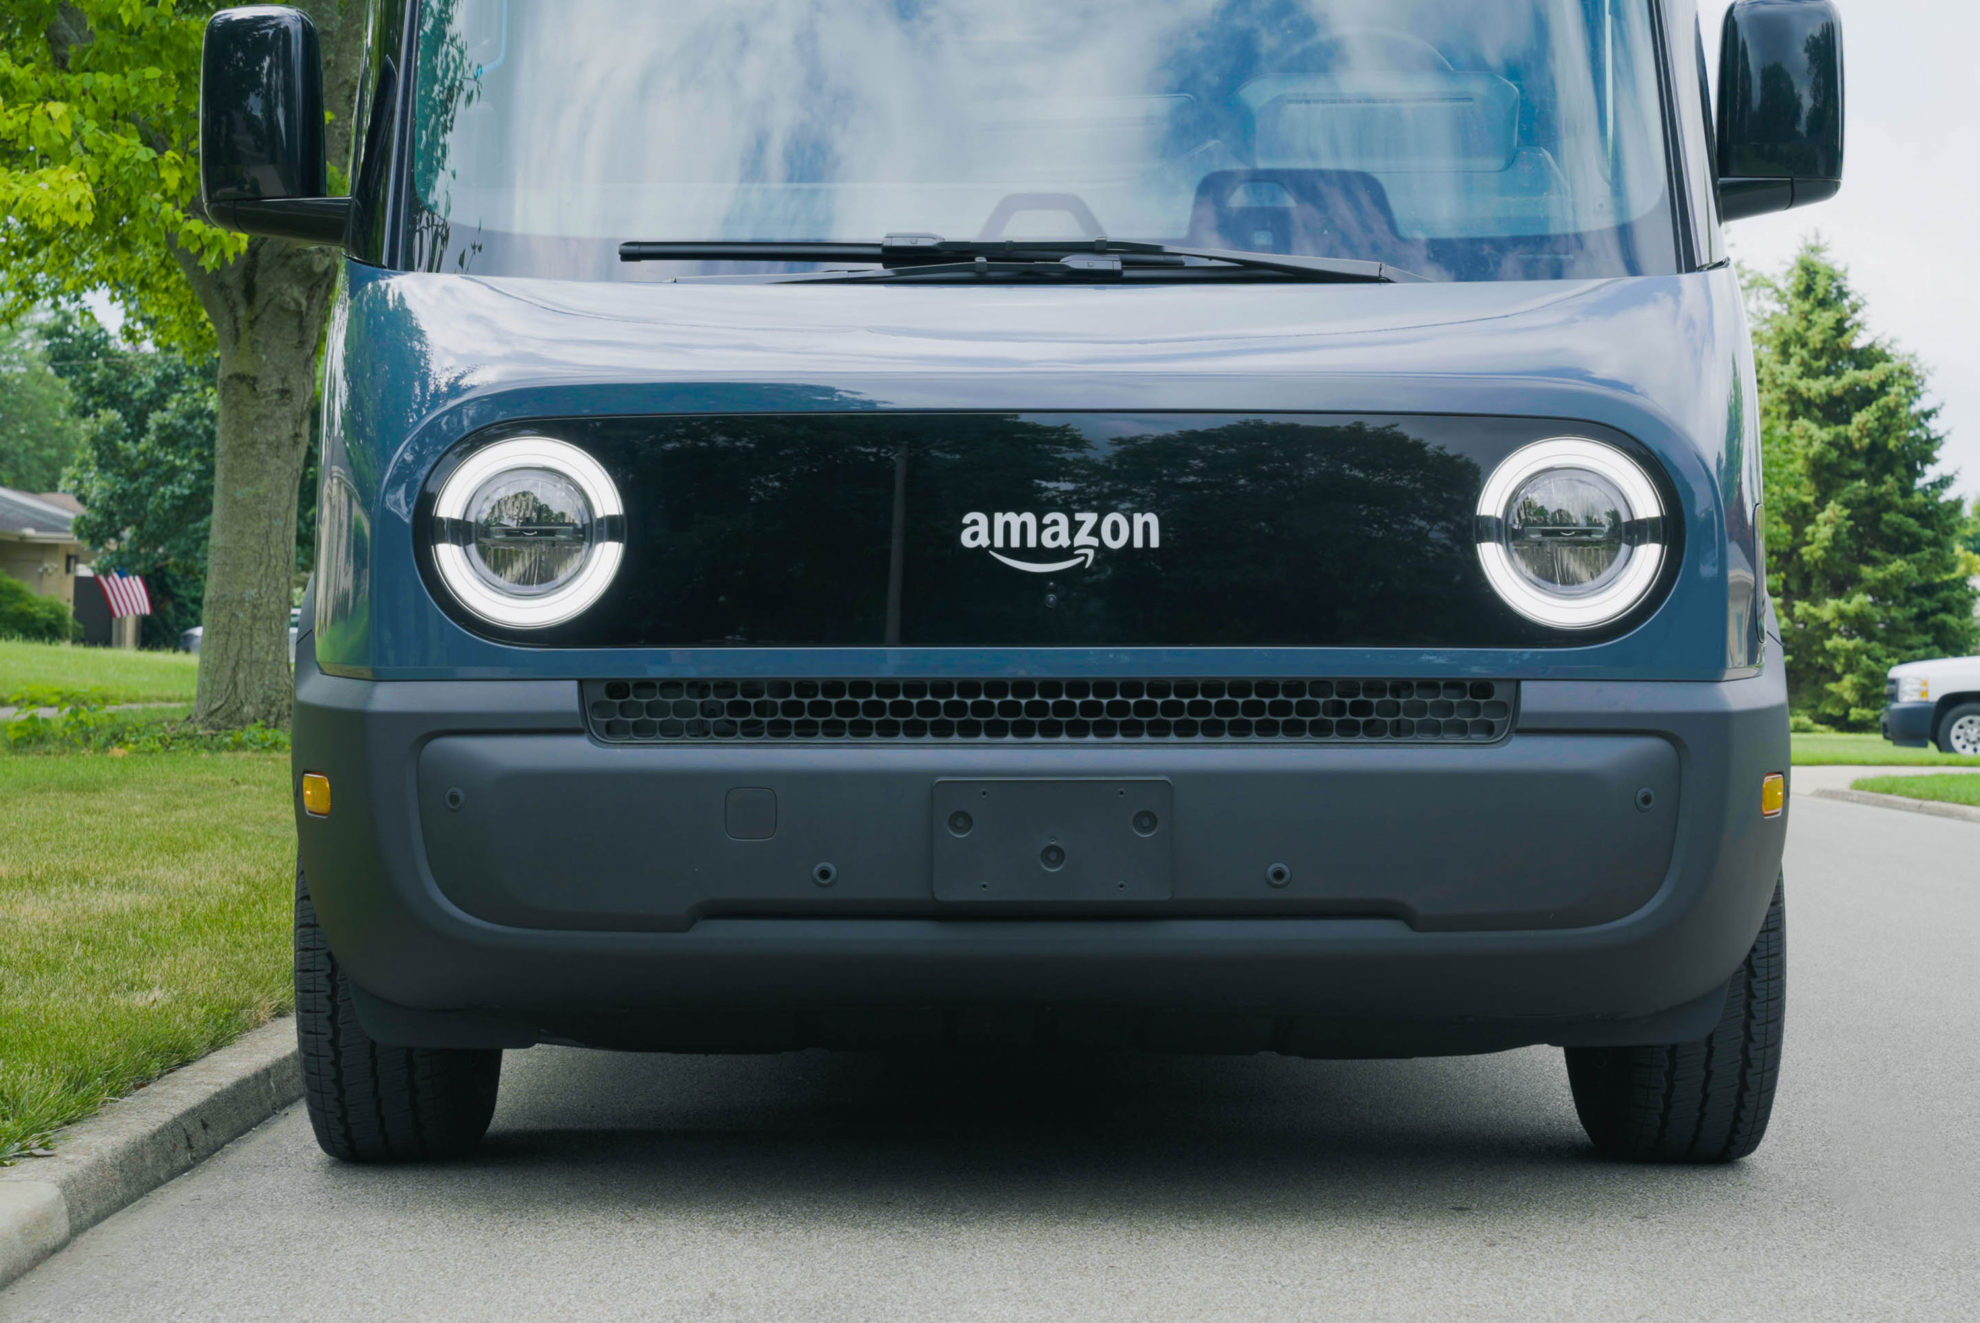 Amazon driver gives an upclose look at the new Rivian EDV allelectric